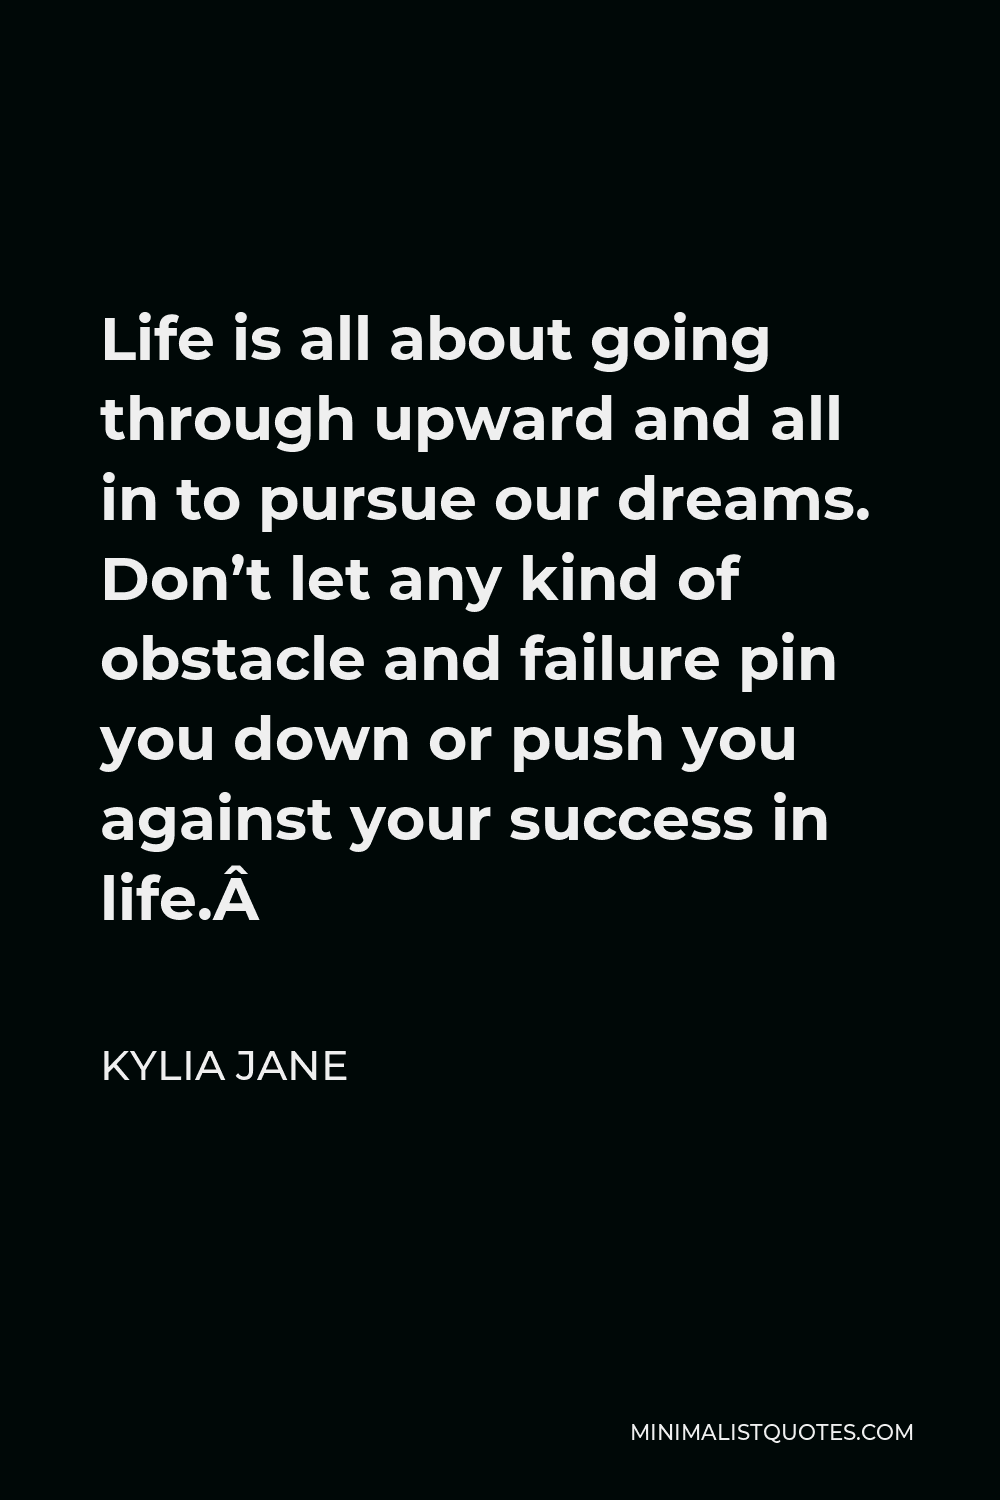 Kylia Jane Quote - Life is all about going through upward and all in to pursue our dreams. Don’t let any kind of obstacle and failure pin you down or push you against your success in life. 